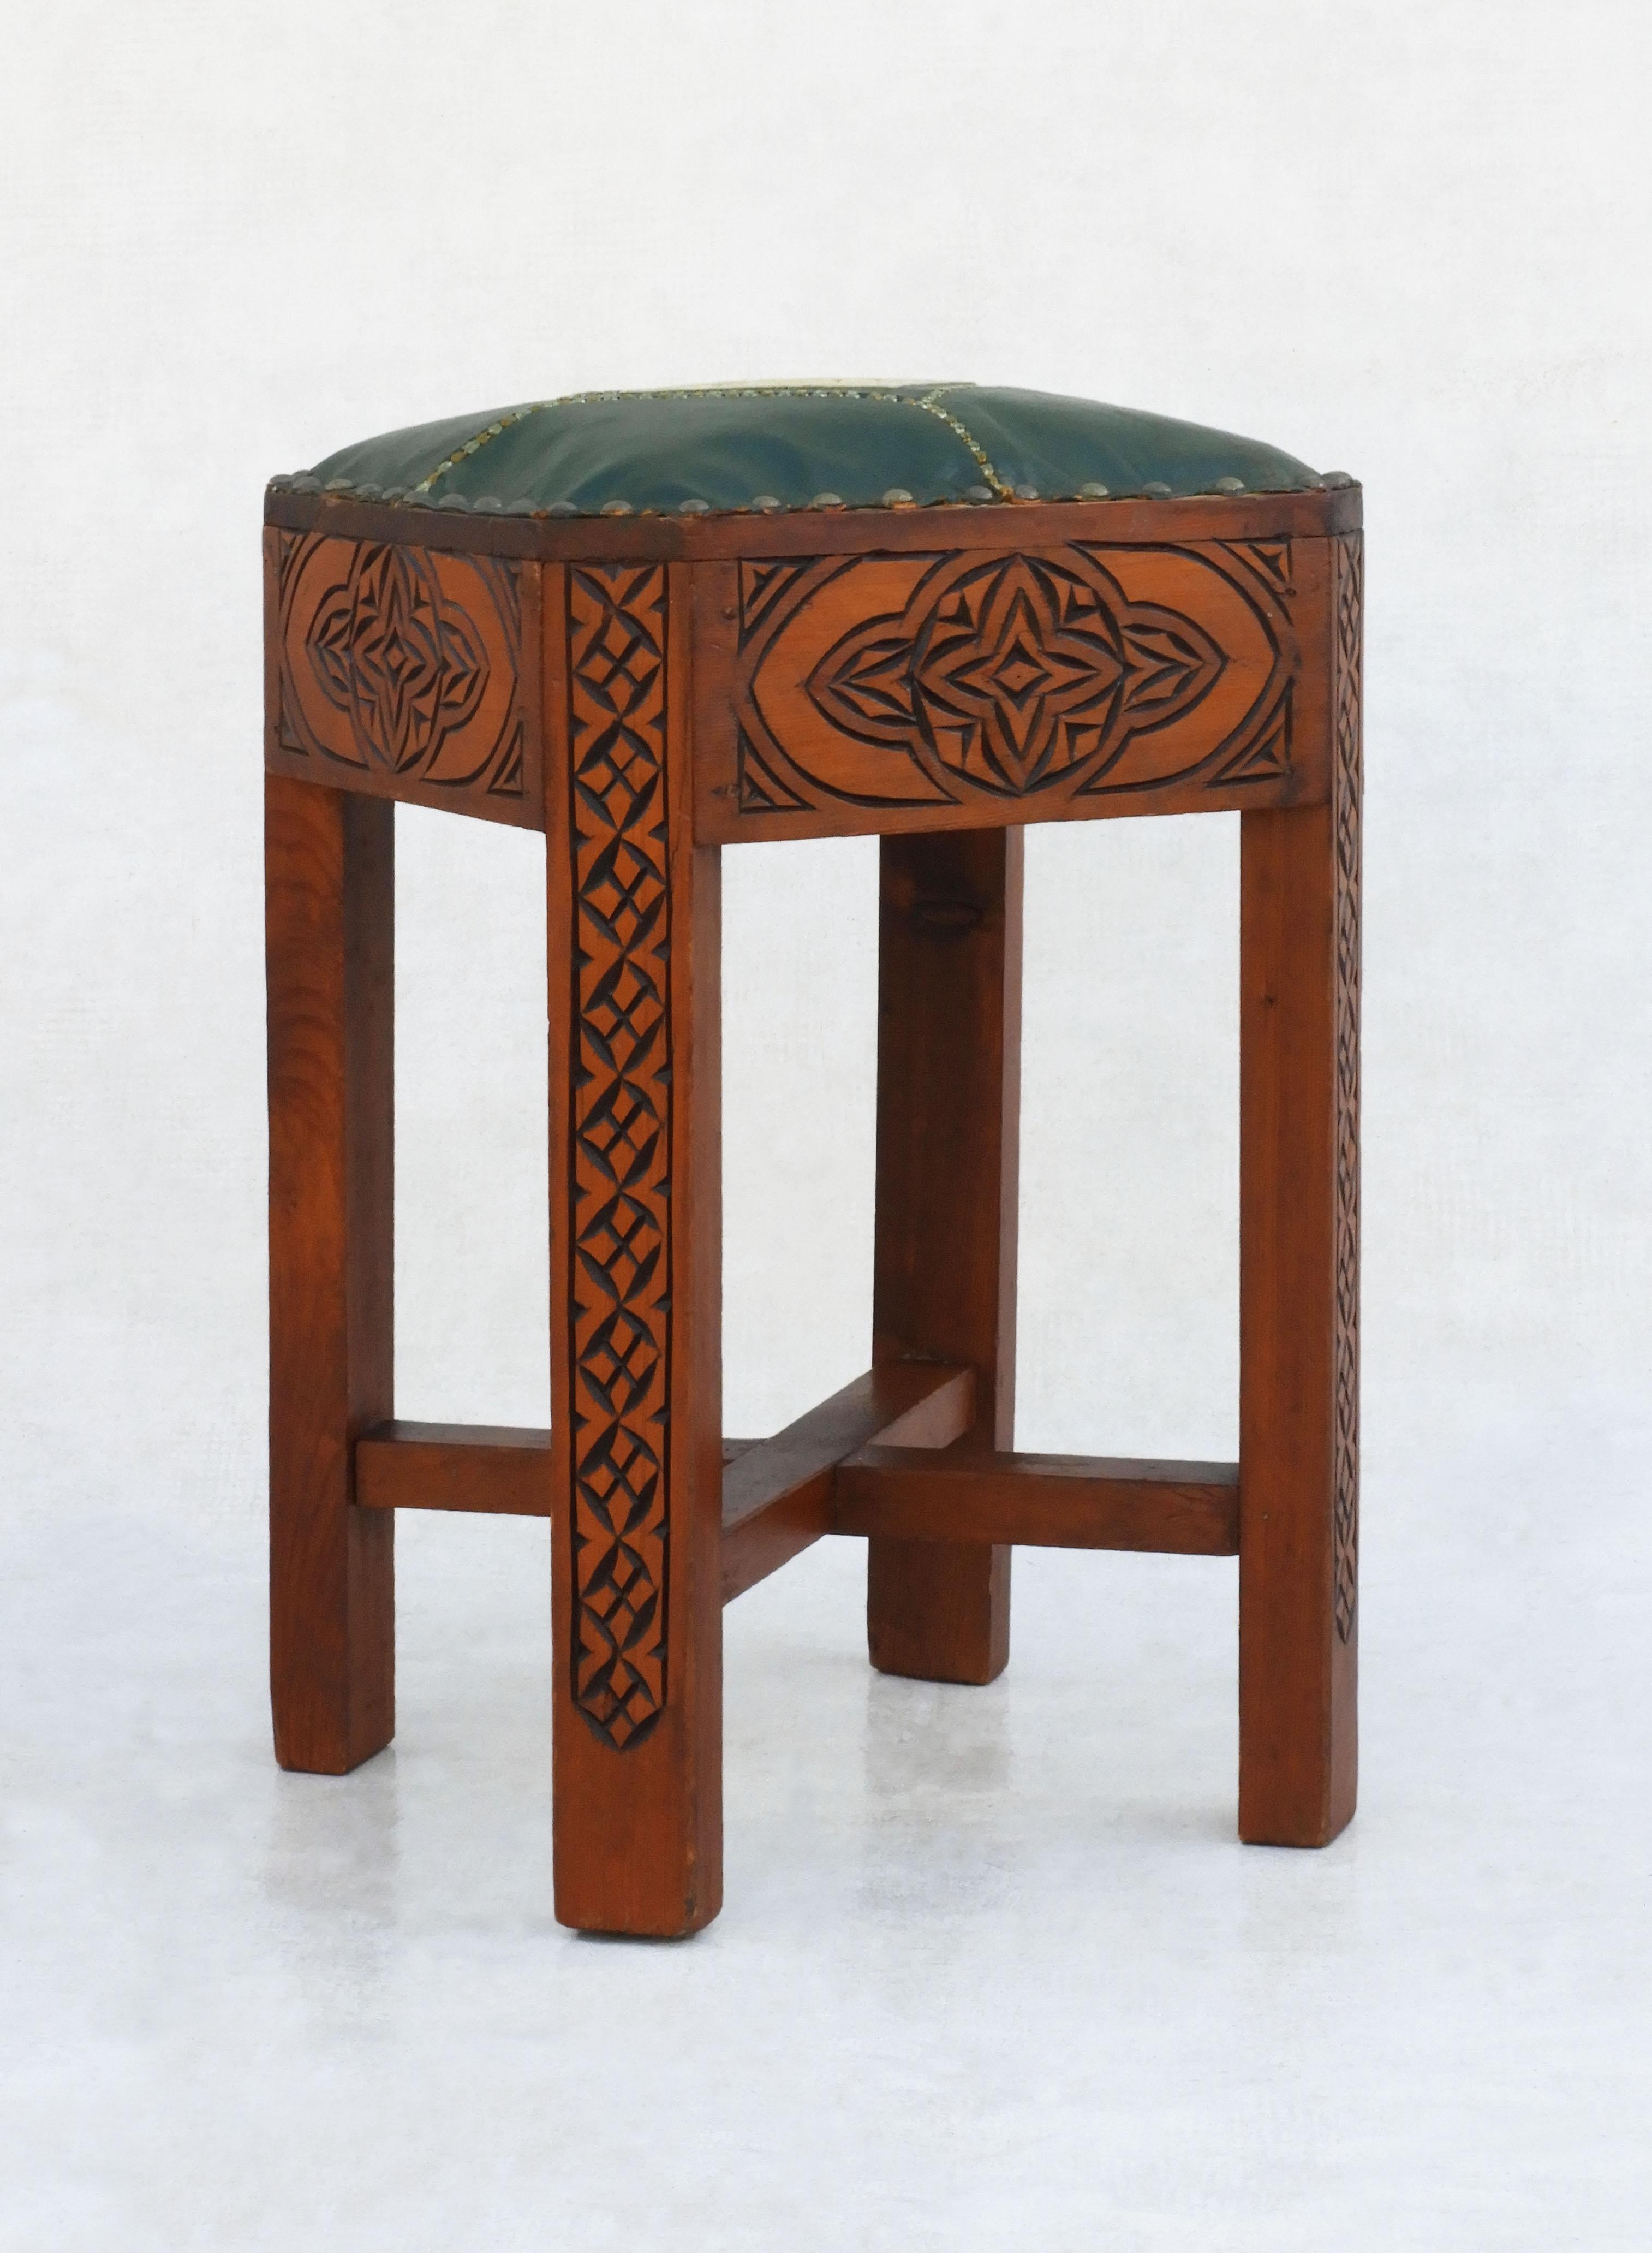 Moorish Style Tabouret Stools Hand Carved Wood and Embroidered Leather C1950s In Good Condition For Sale In Trensacq, FR